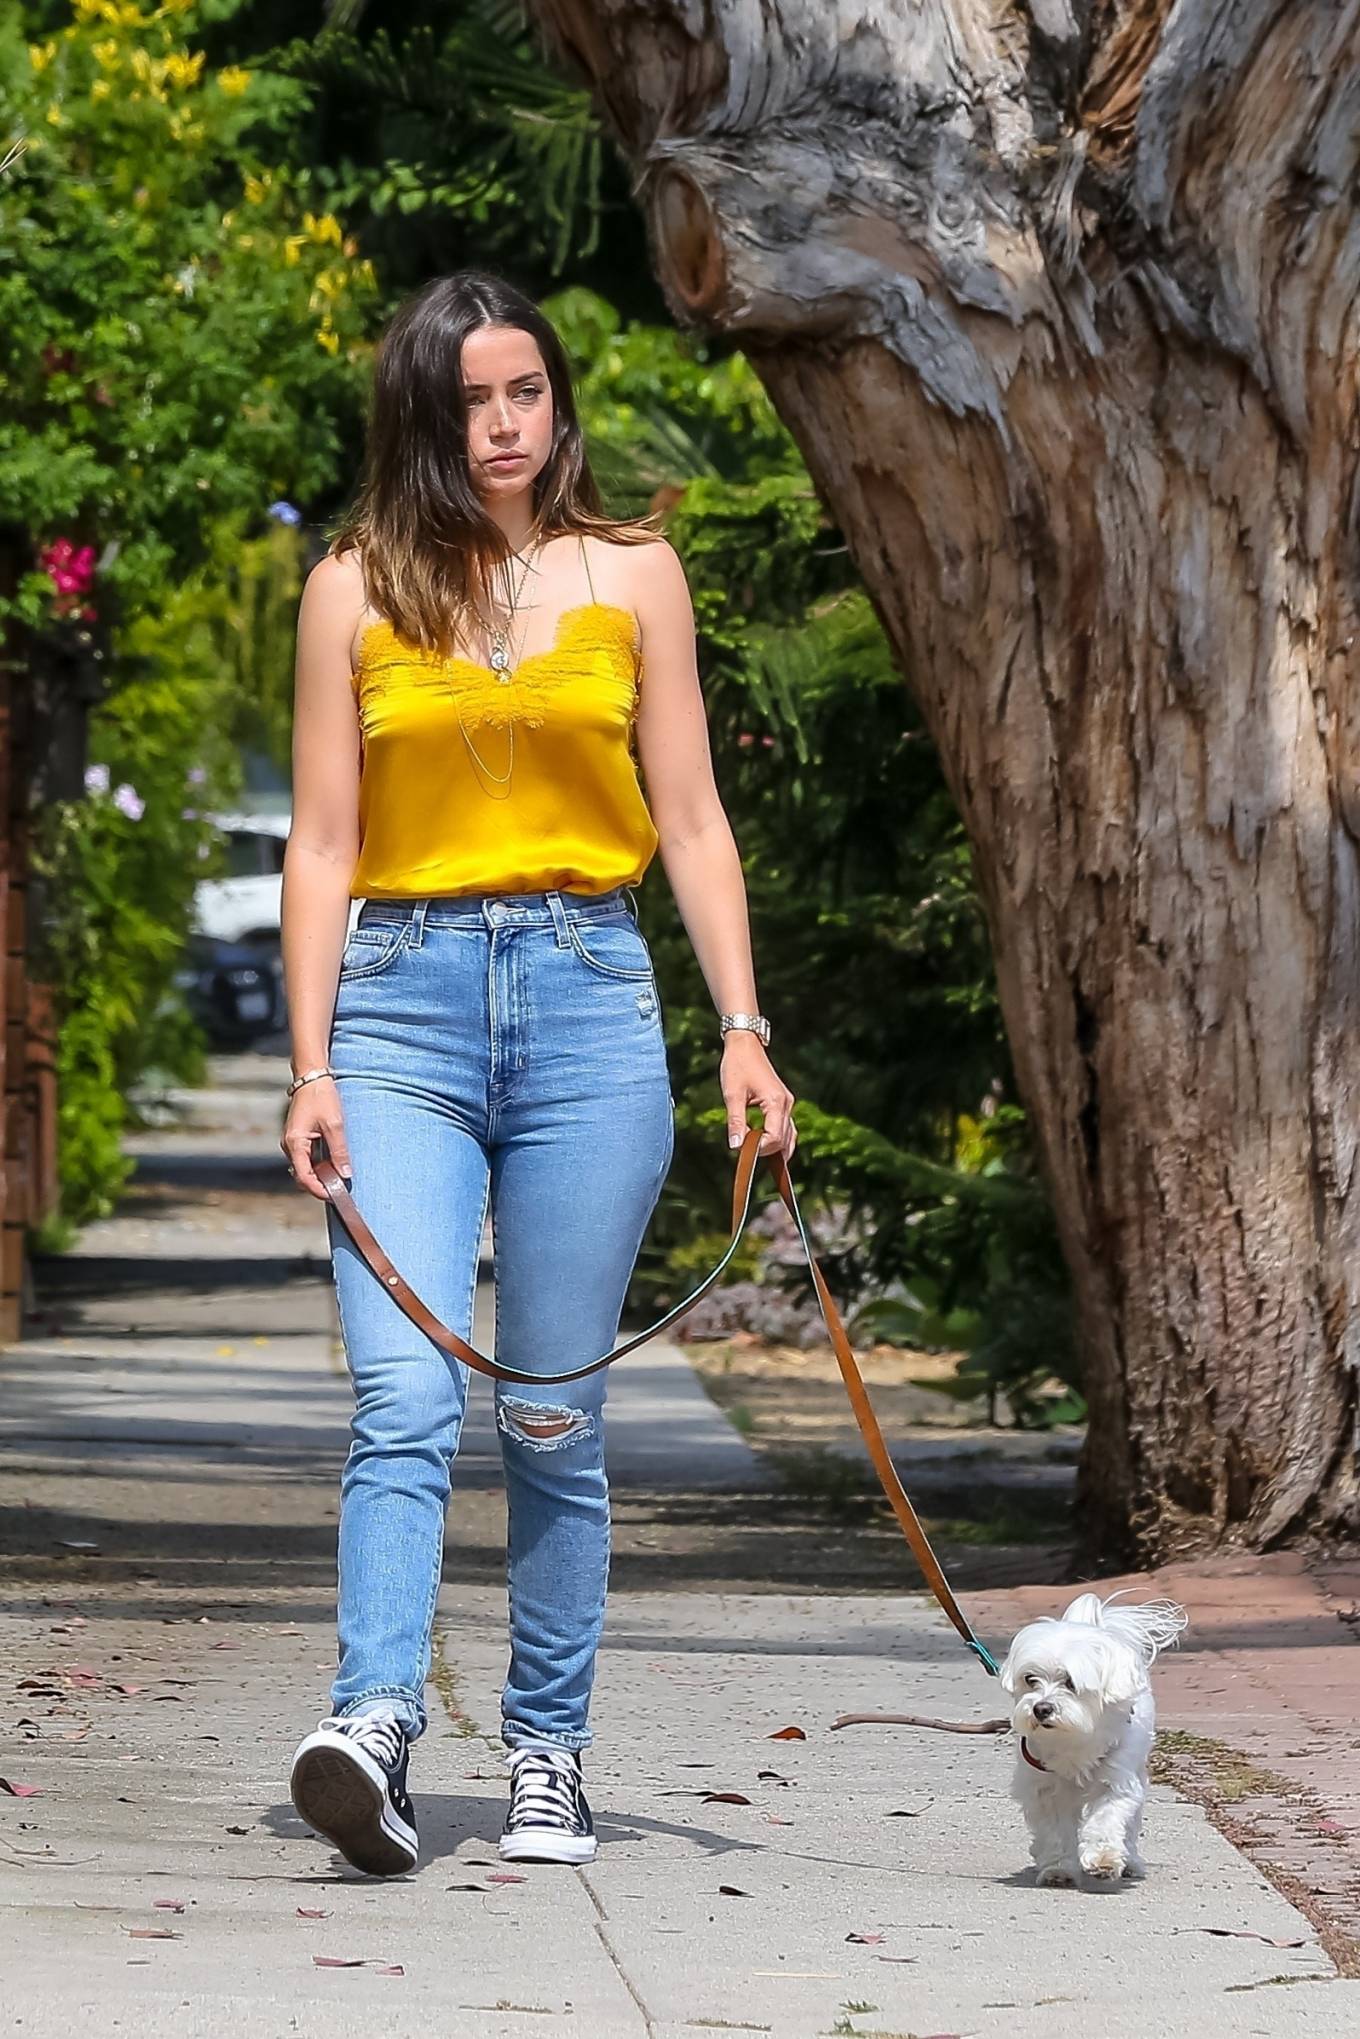 Ana De Armas in Yellow Top out with her dog in Venice-08 | GotCeleb